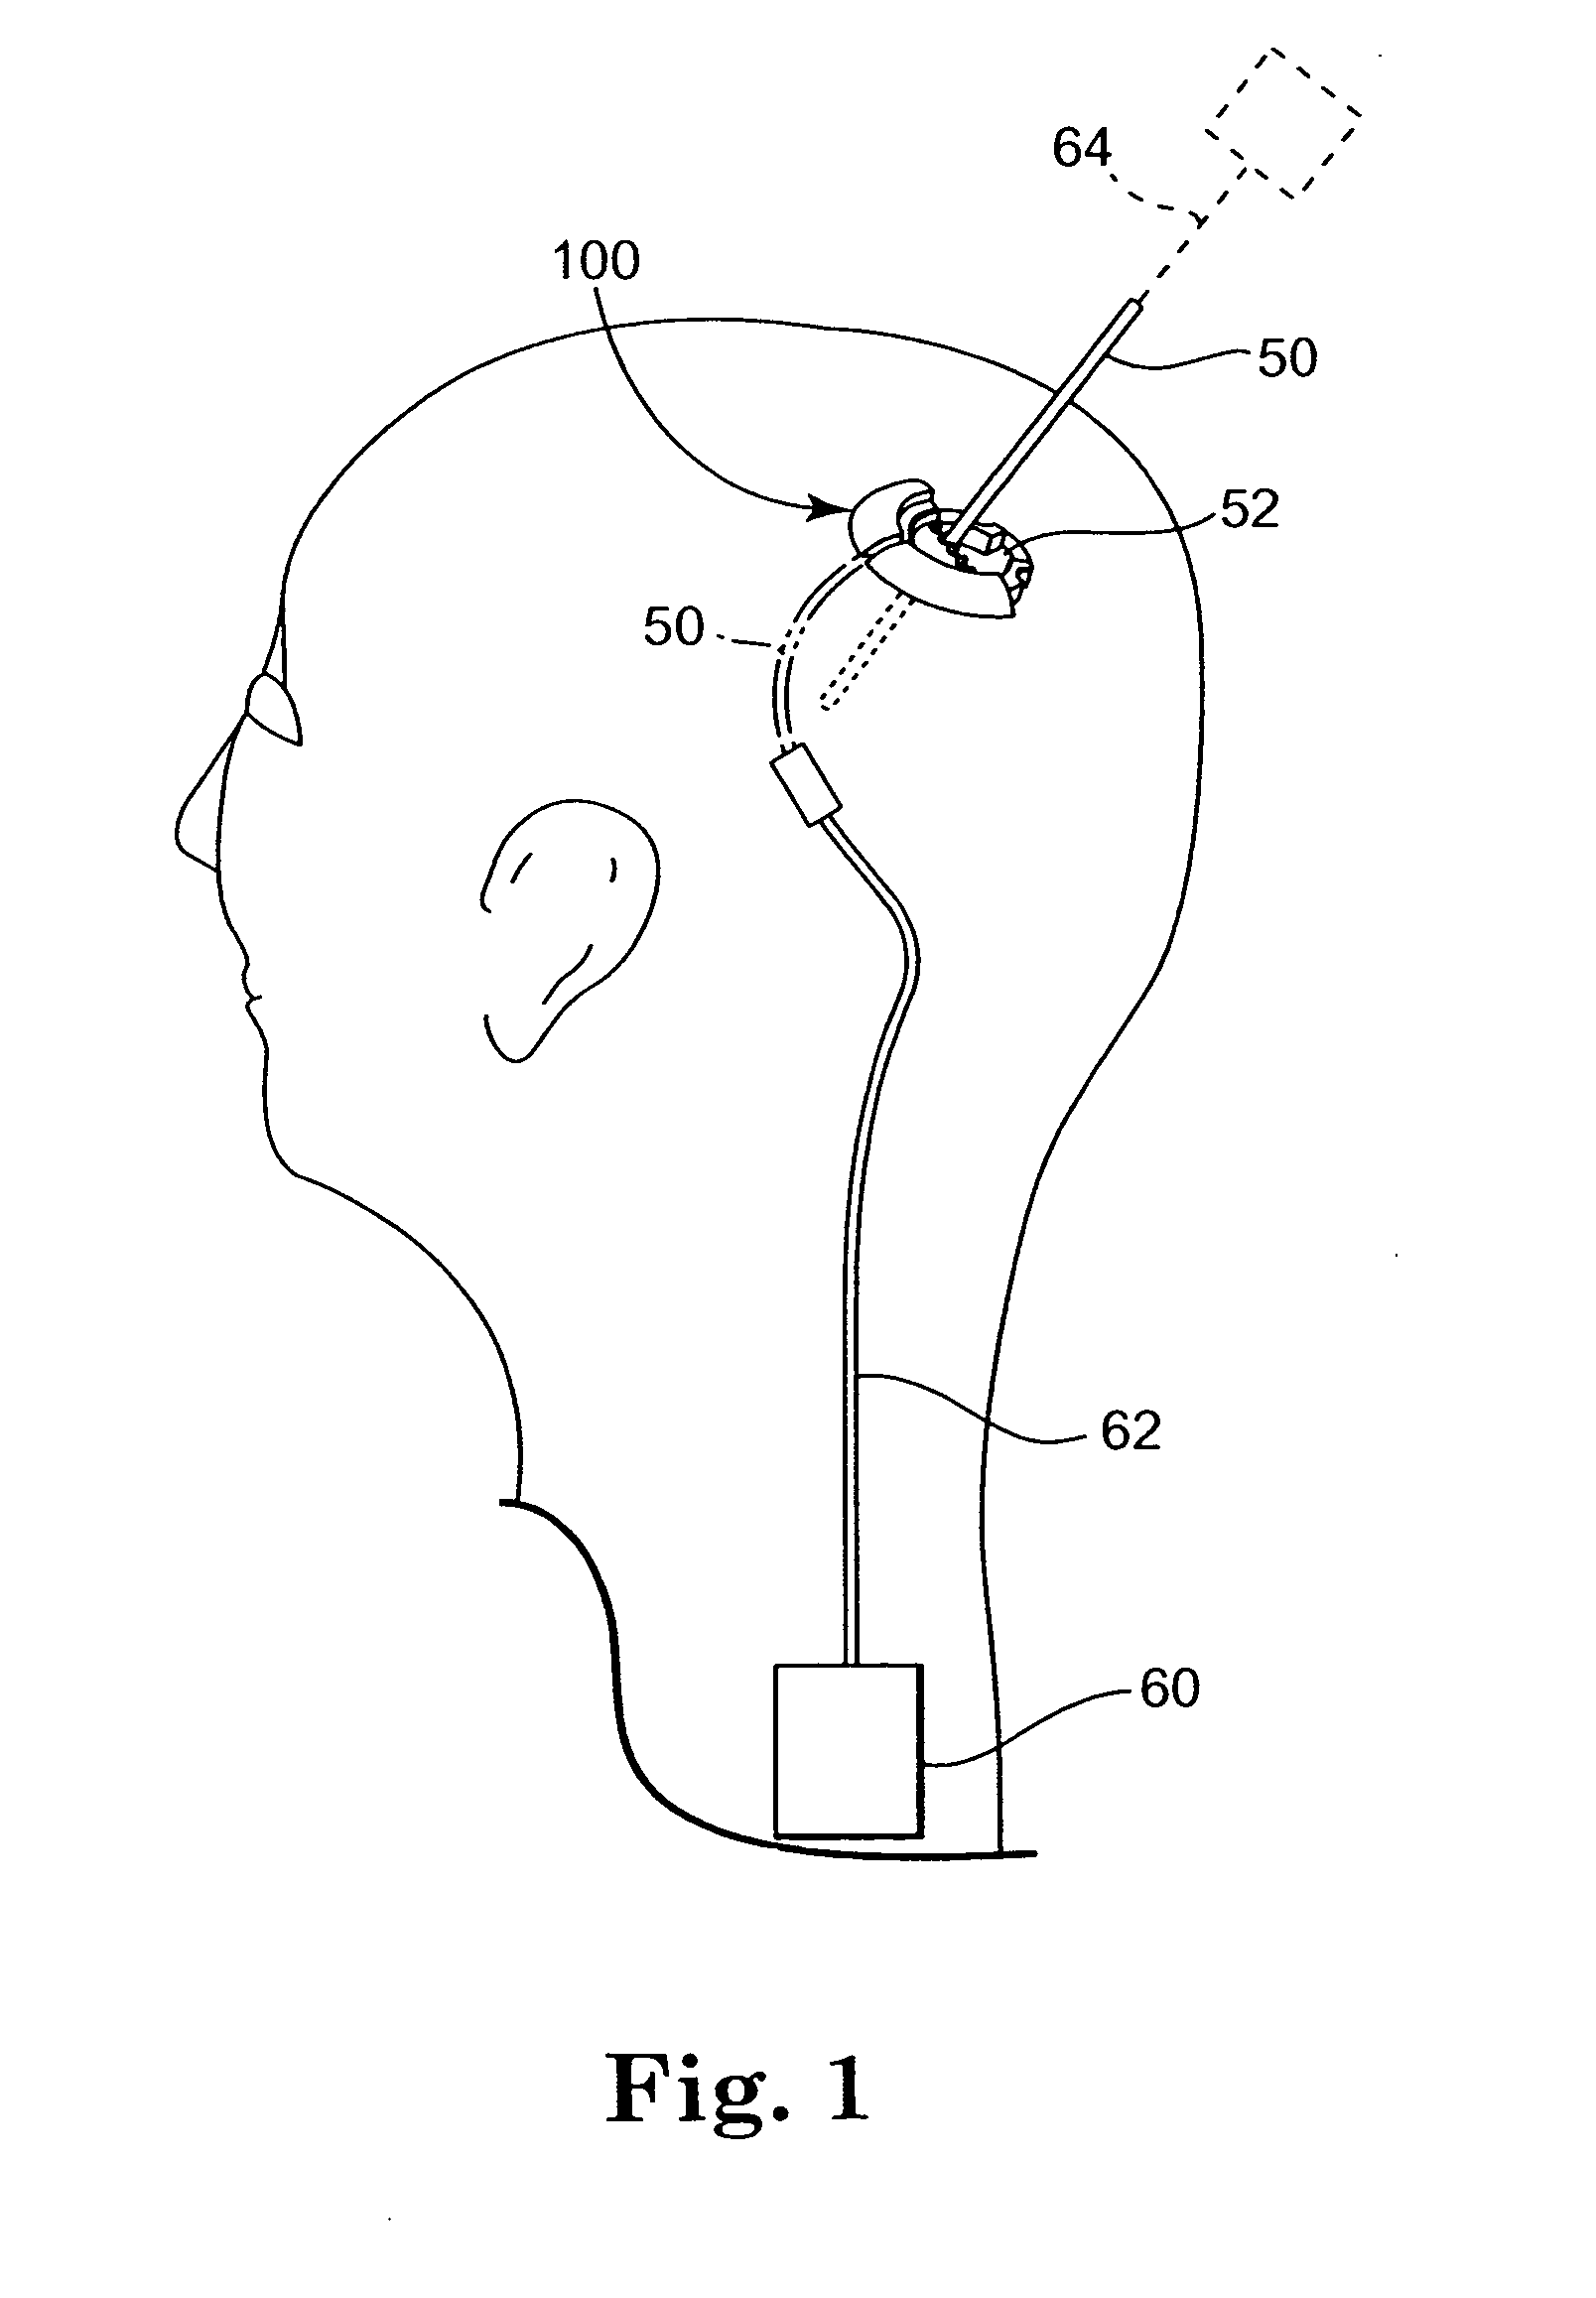 Low profile apparatus for securing a therapy delivery device within a burr hole